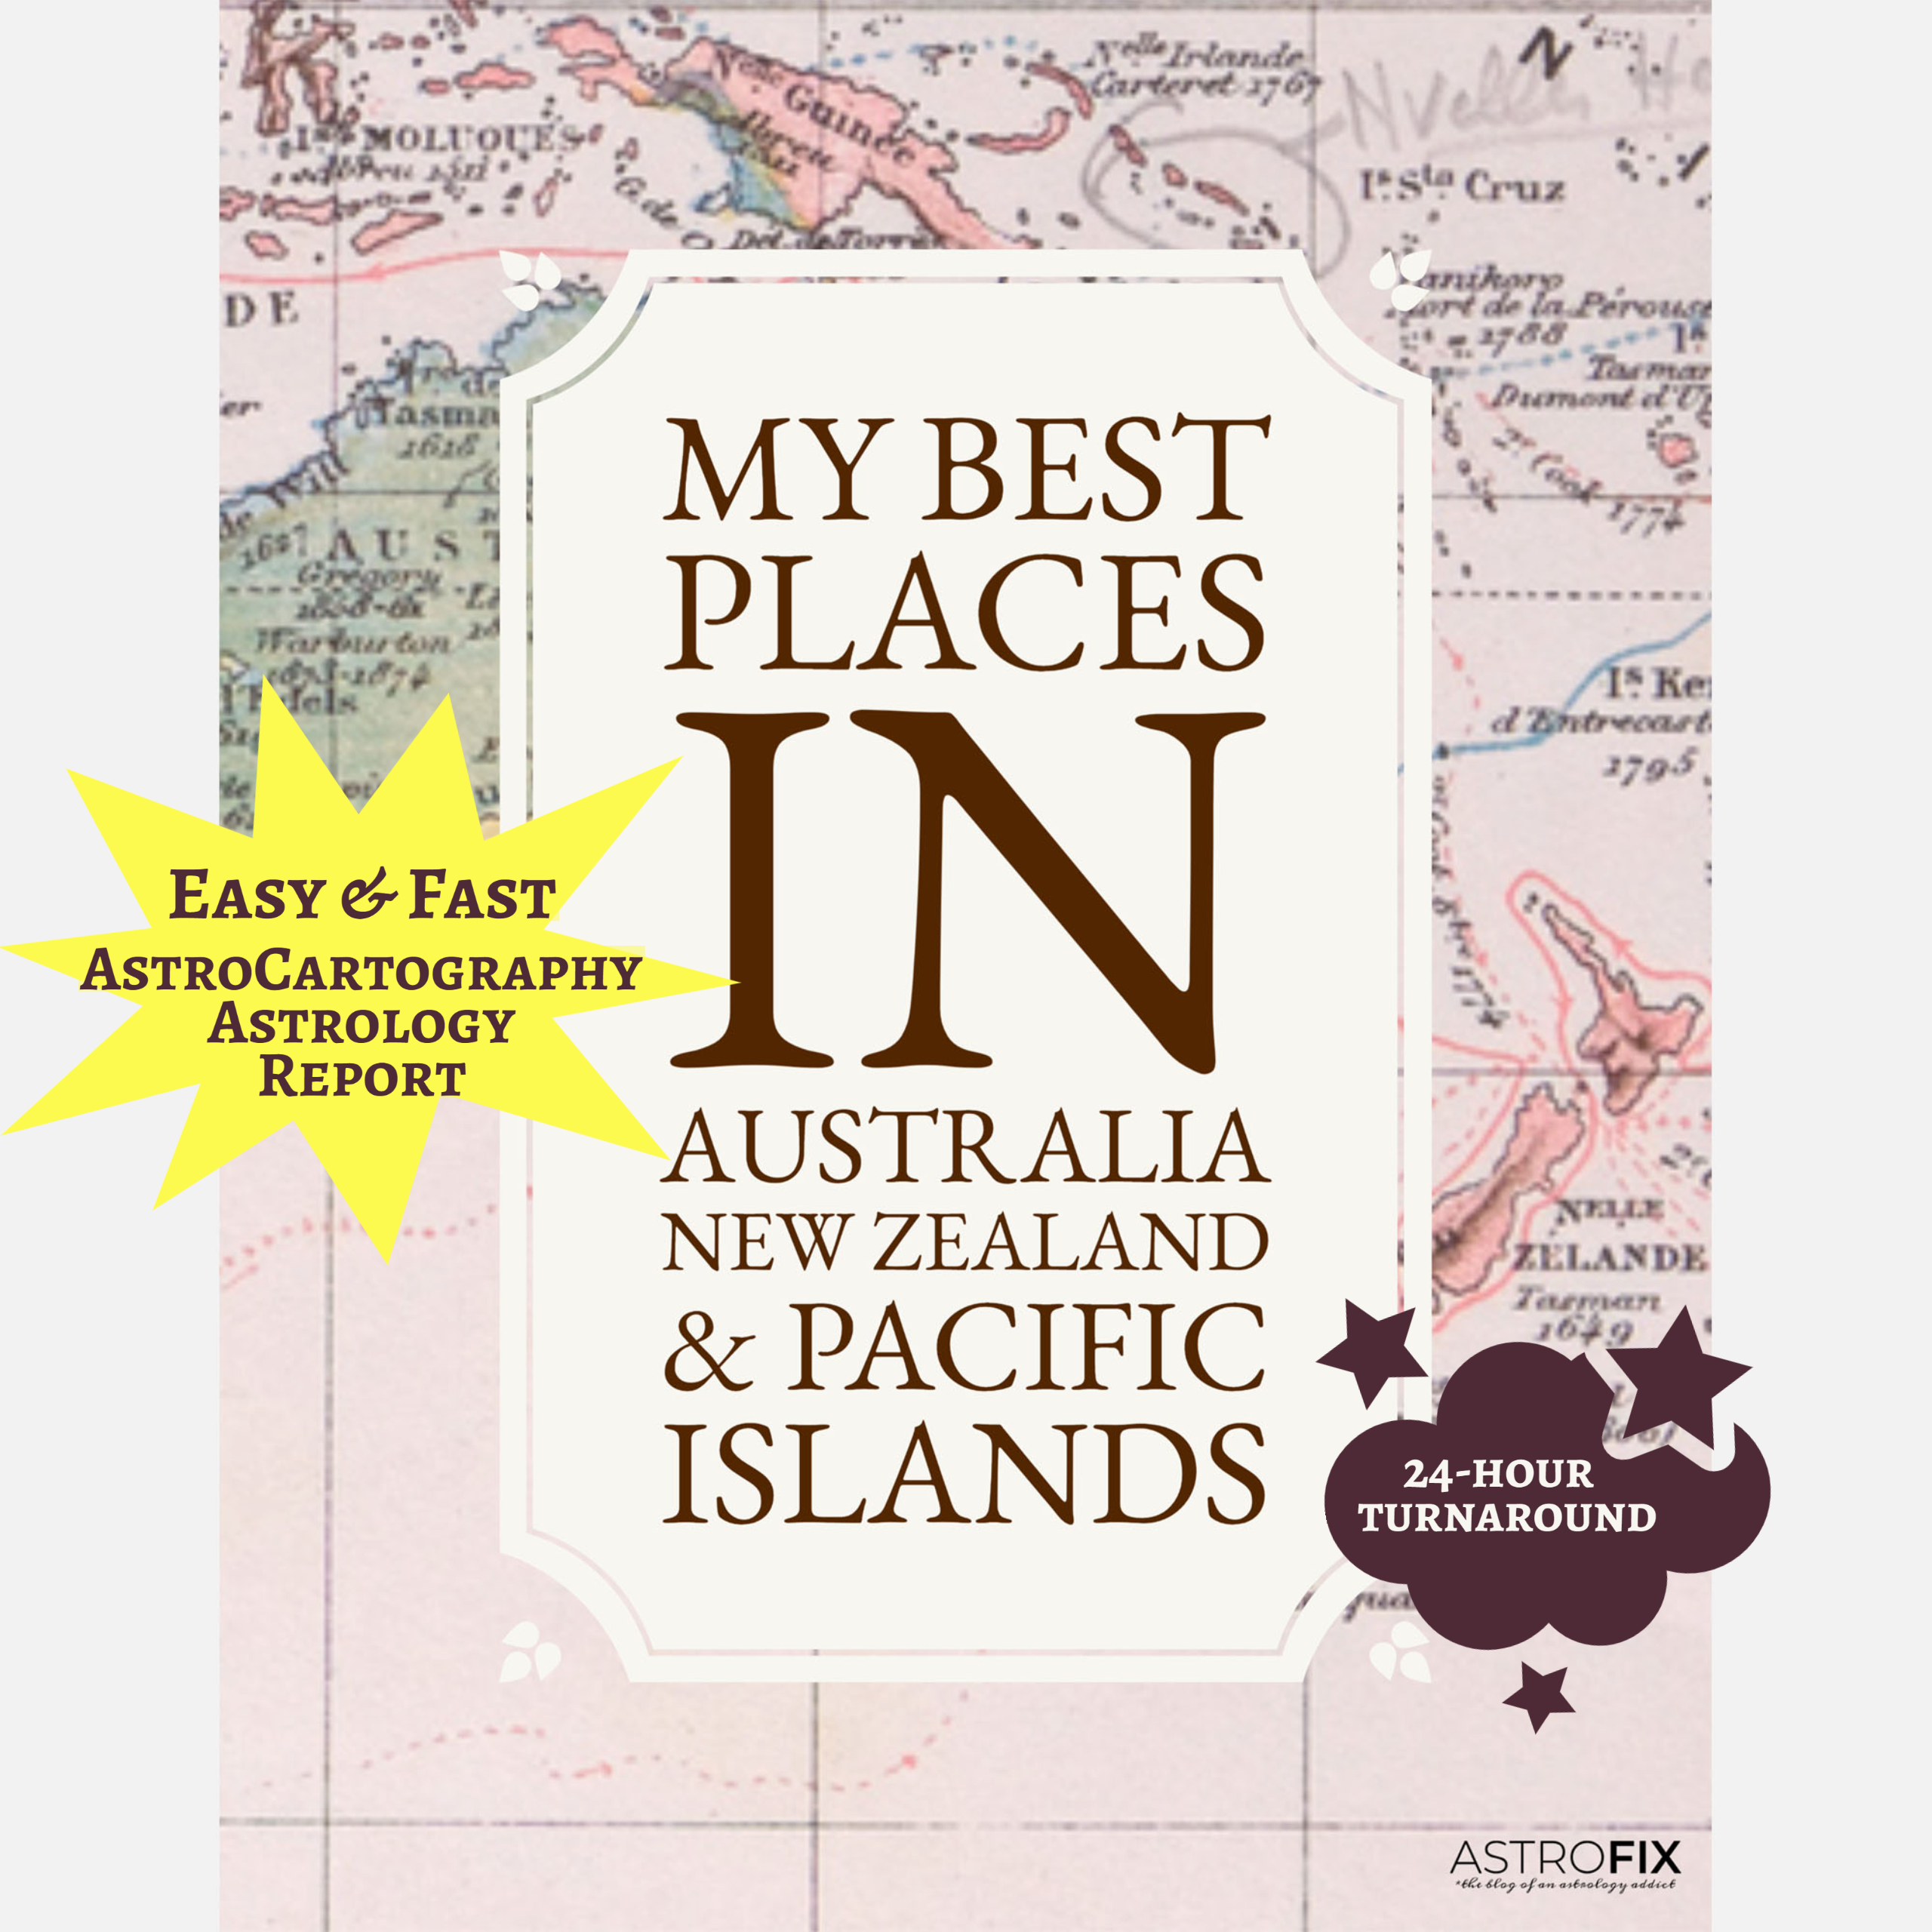 My Best Places in Australia AstroCartography Report,My Best Places in Australia AstroCartography Astrology Report,My Best Places in Australia Relocation Report,Australia AstroCartography Report,astrocartography relocation Australia and New Zealand